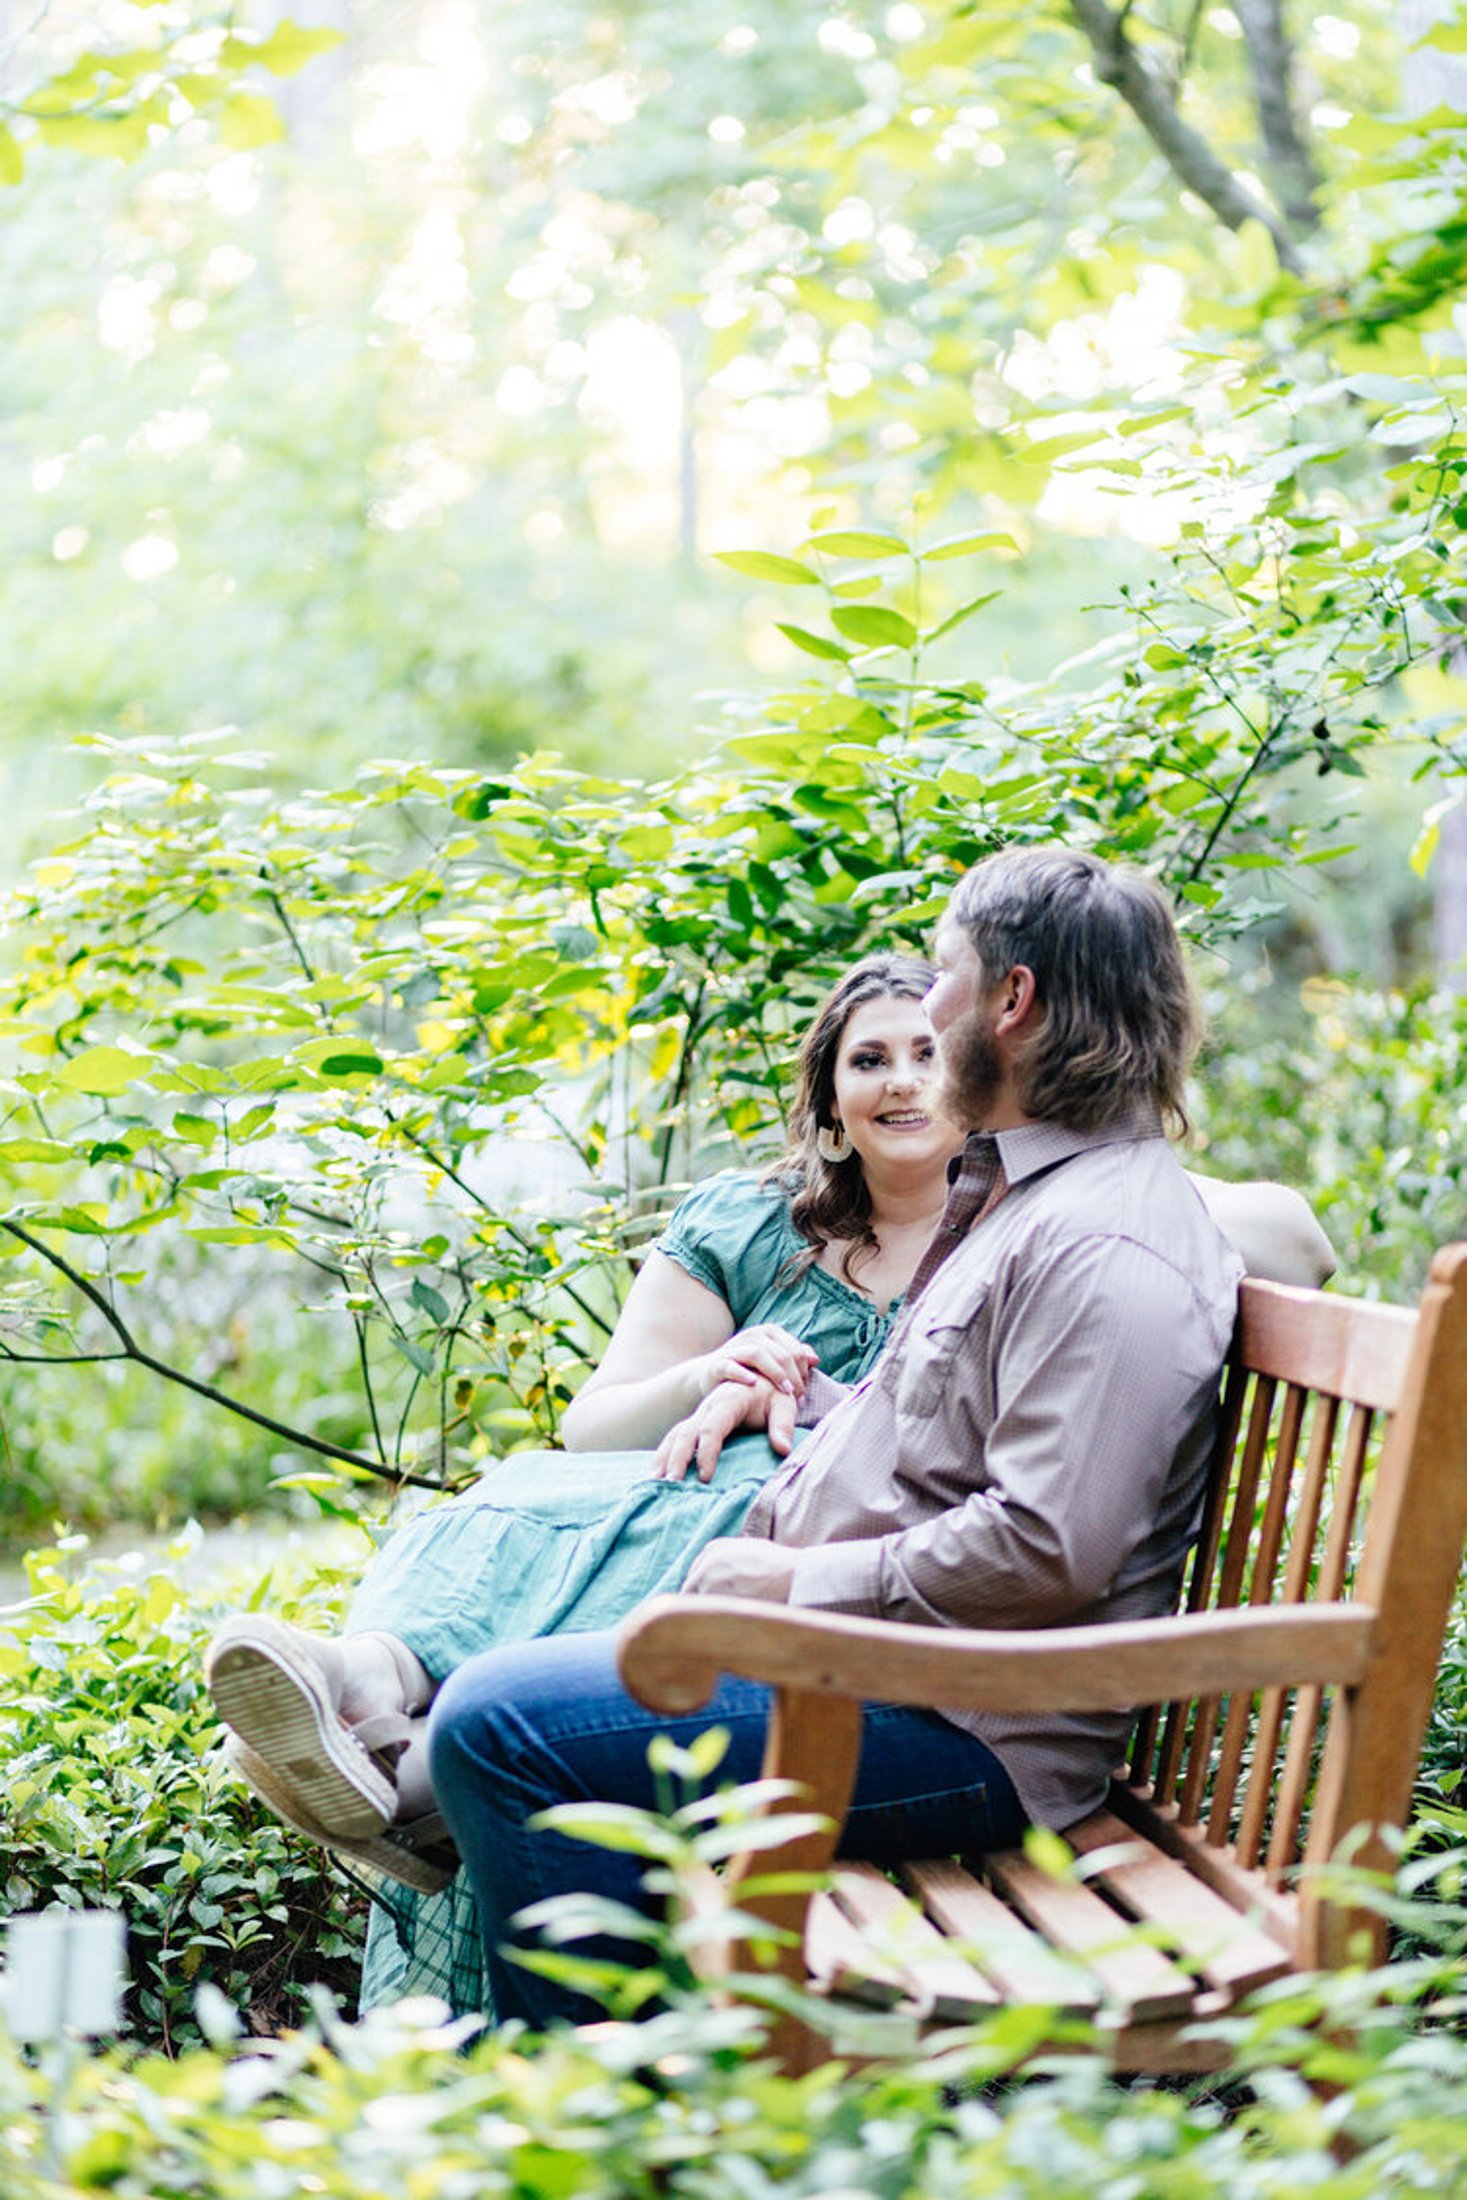 5 of the best places to take engagment photos in Greenville, SC | SC Botanical Gardens-14.jpg